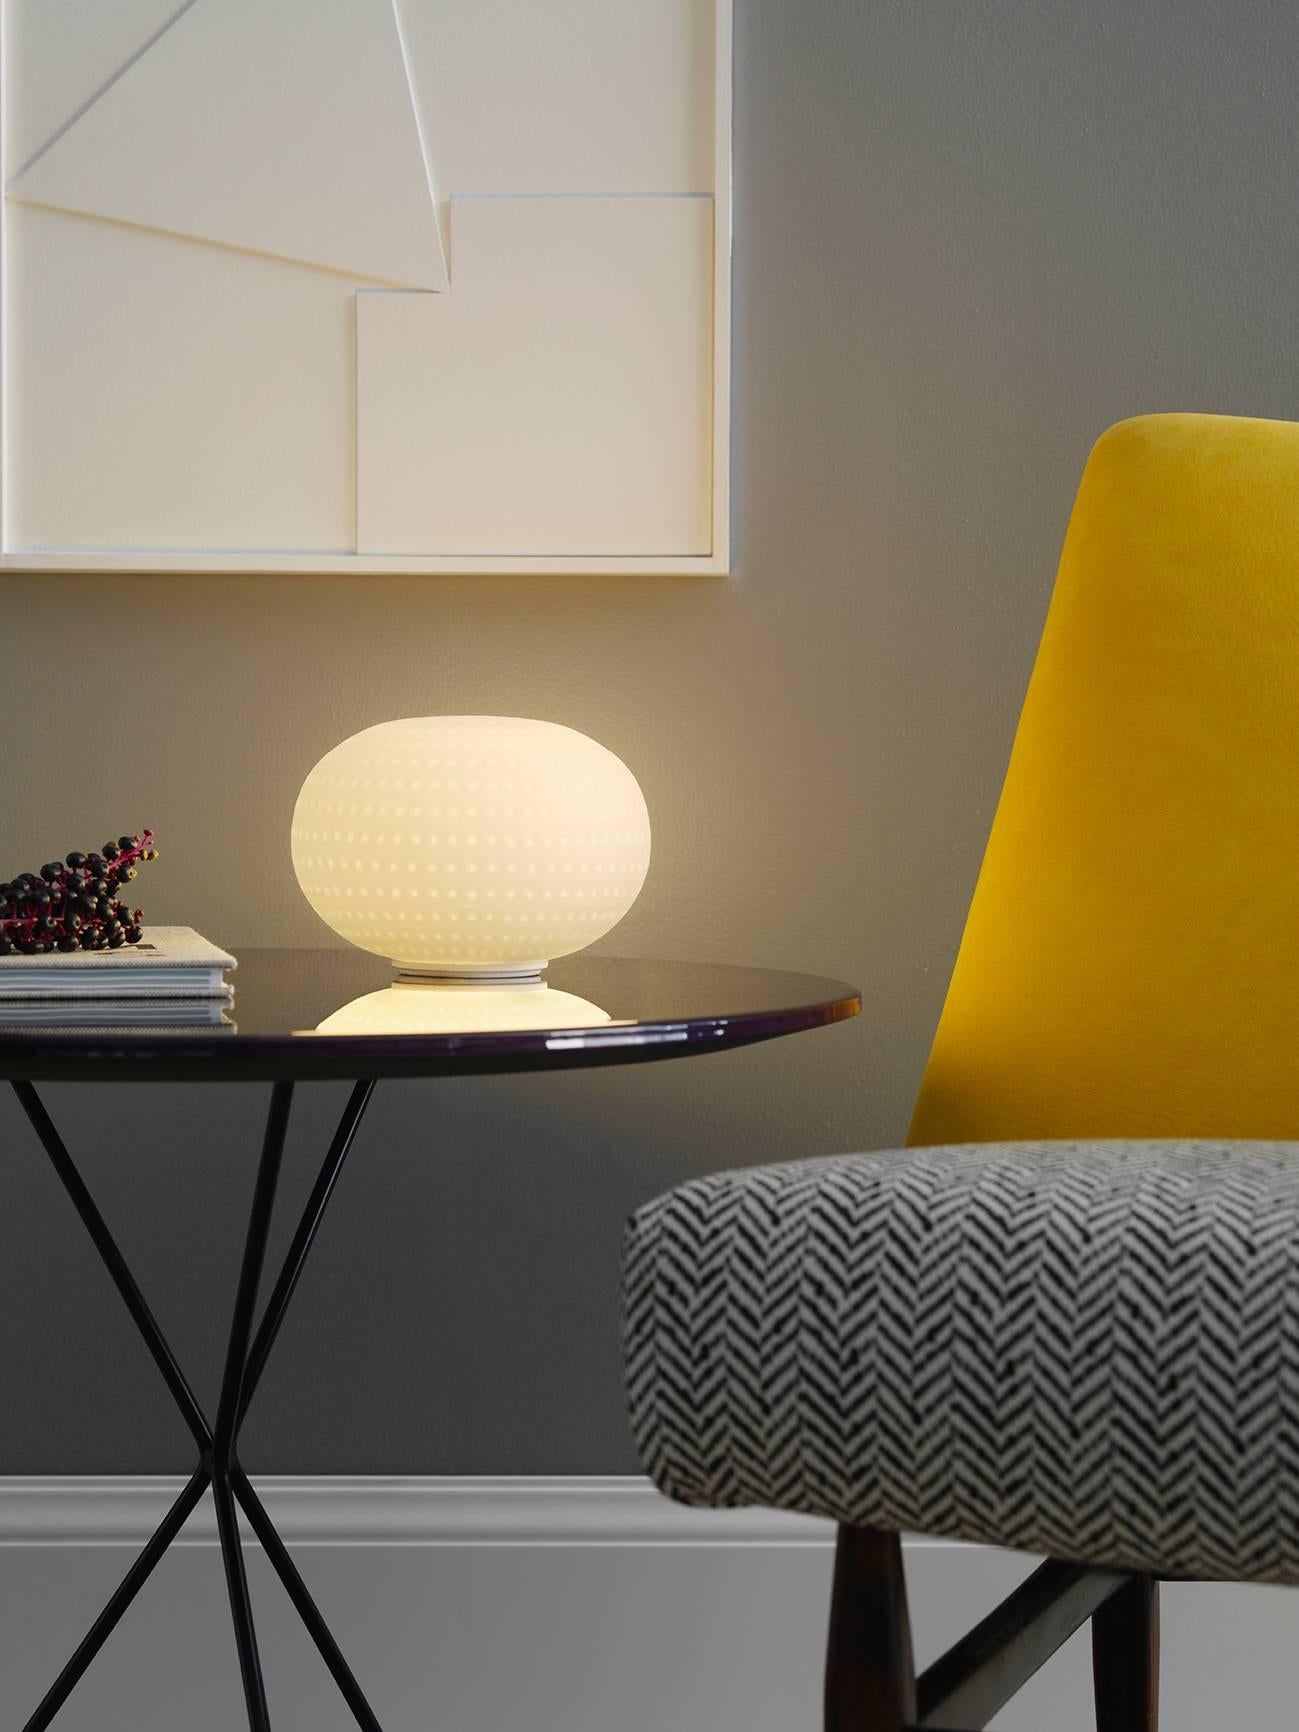 Bianca small table lamp without stem by Matti Klenell from Fontana Arte.

Its beautifully balanced shape is enriched and made unique by an orderly series of delicate, light grooves that, on the white volume of the glass, look like tiny prints on